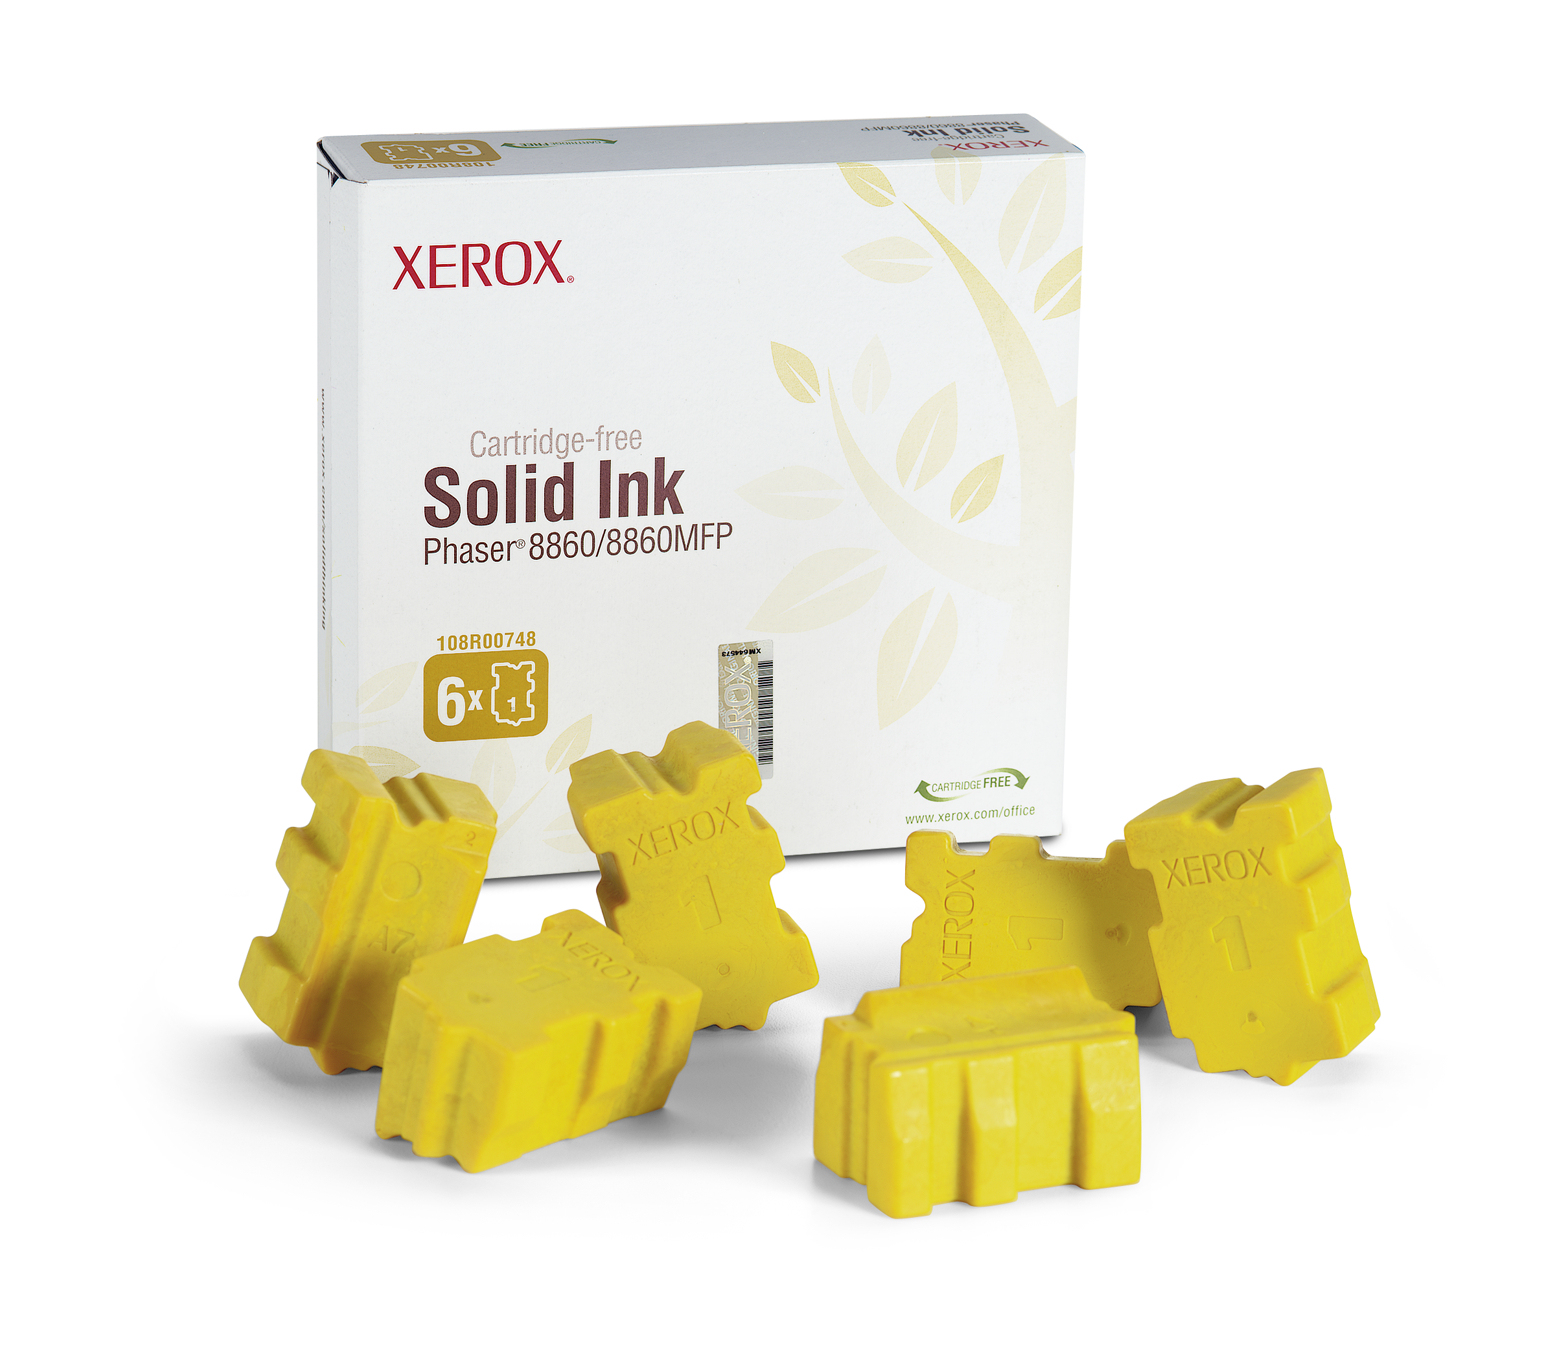 6 Pz Solid Ink Giallo Xerox Genuine Supplies 108r00748 95205731354